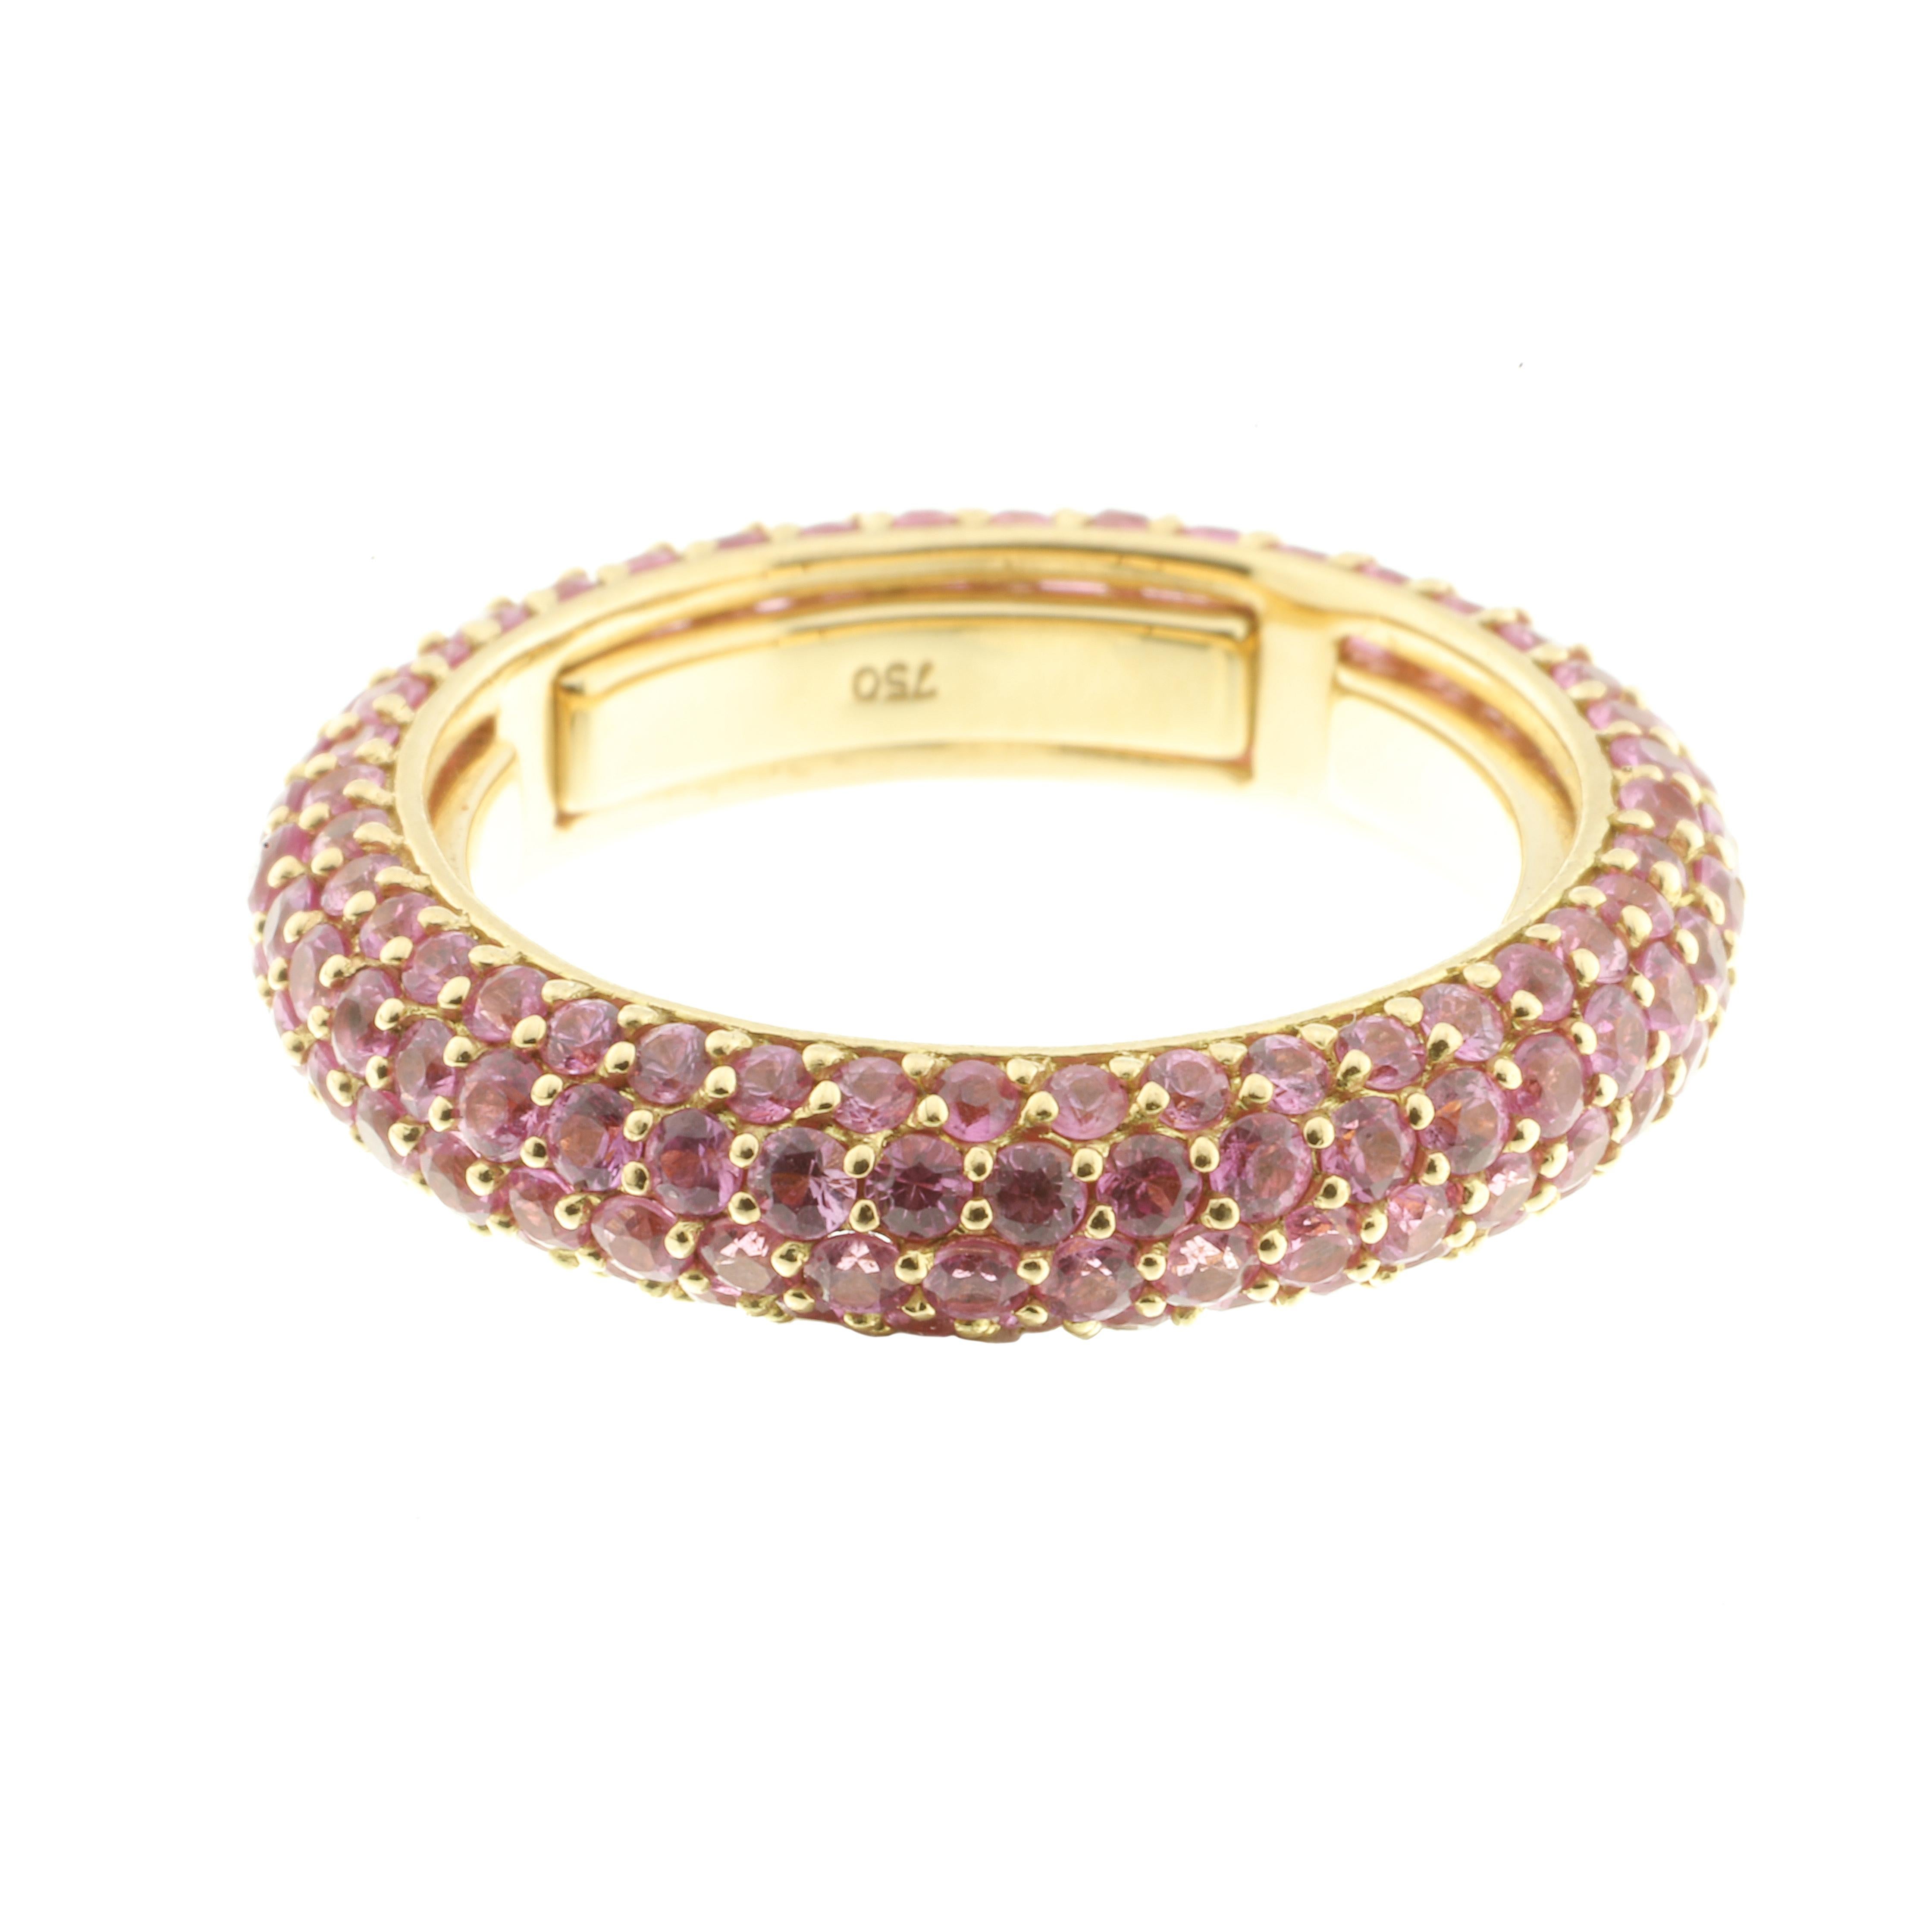 An 18-karat yellow gold ring encircled by 3.27 carats of pink sapphires.

The ring is fabulous to wear, inside the band are a series of sprung sizers which comfortably fit the ring to your finger. The piece stands out as a unique ring when worn